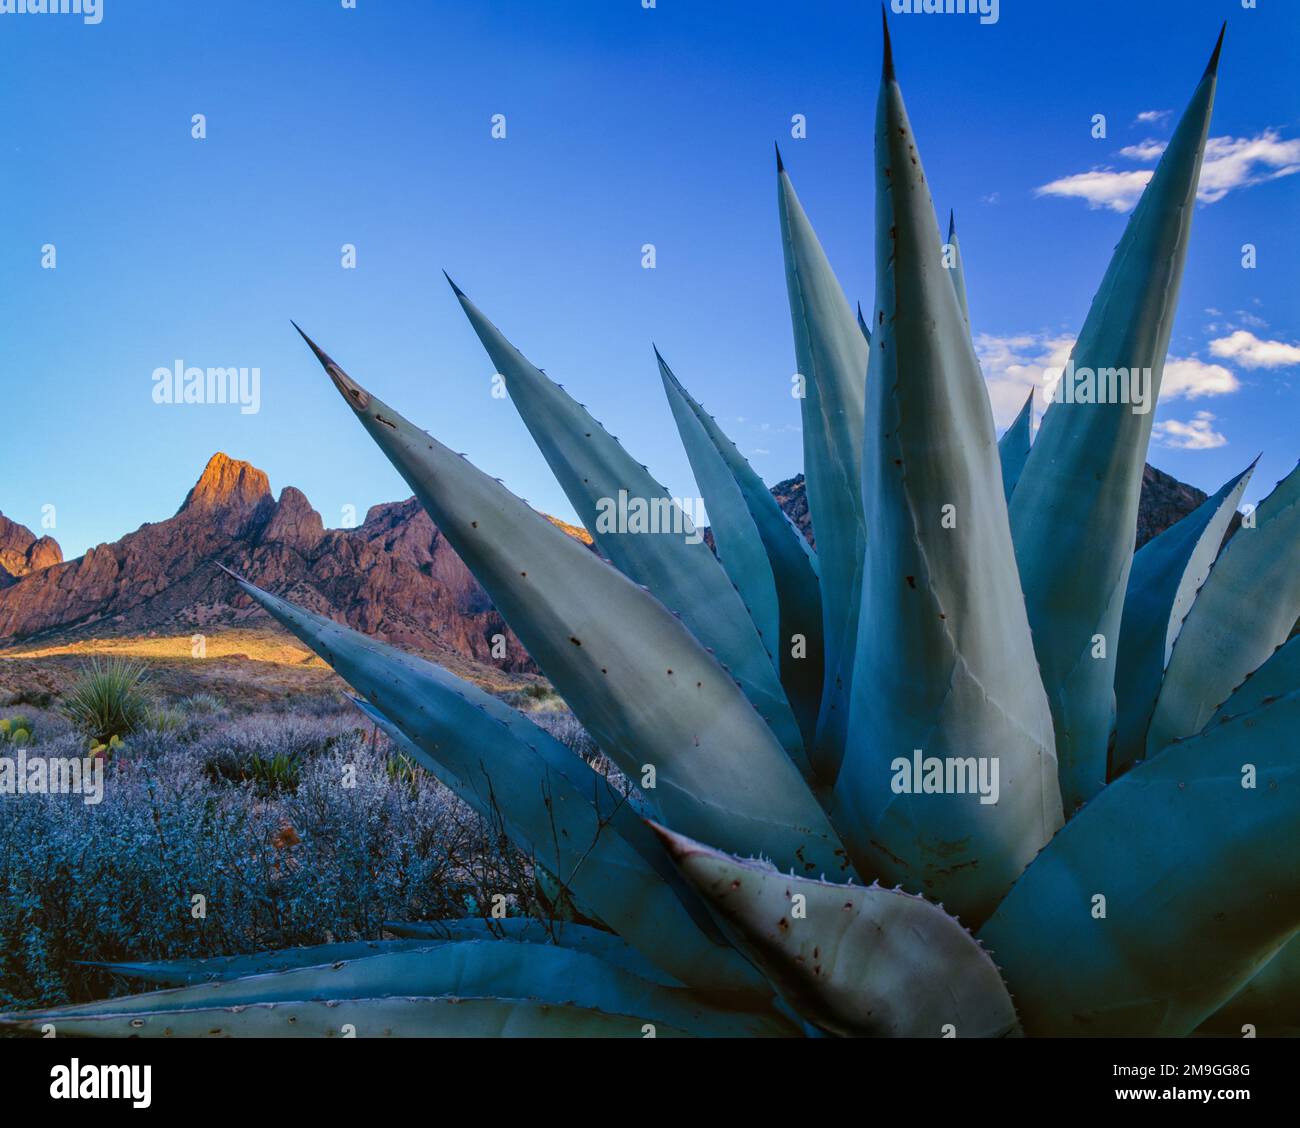 Agave (Agave havardiana) plant in desert and Chisos mountains in background, Big Bend National Park, Texas, USA Stock Photo